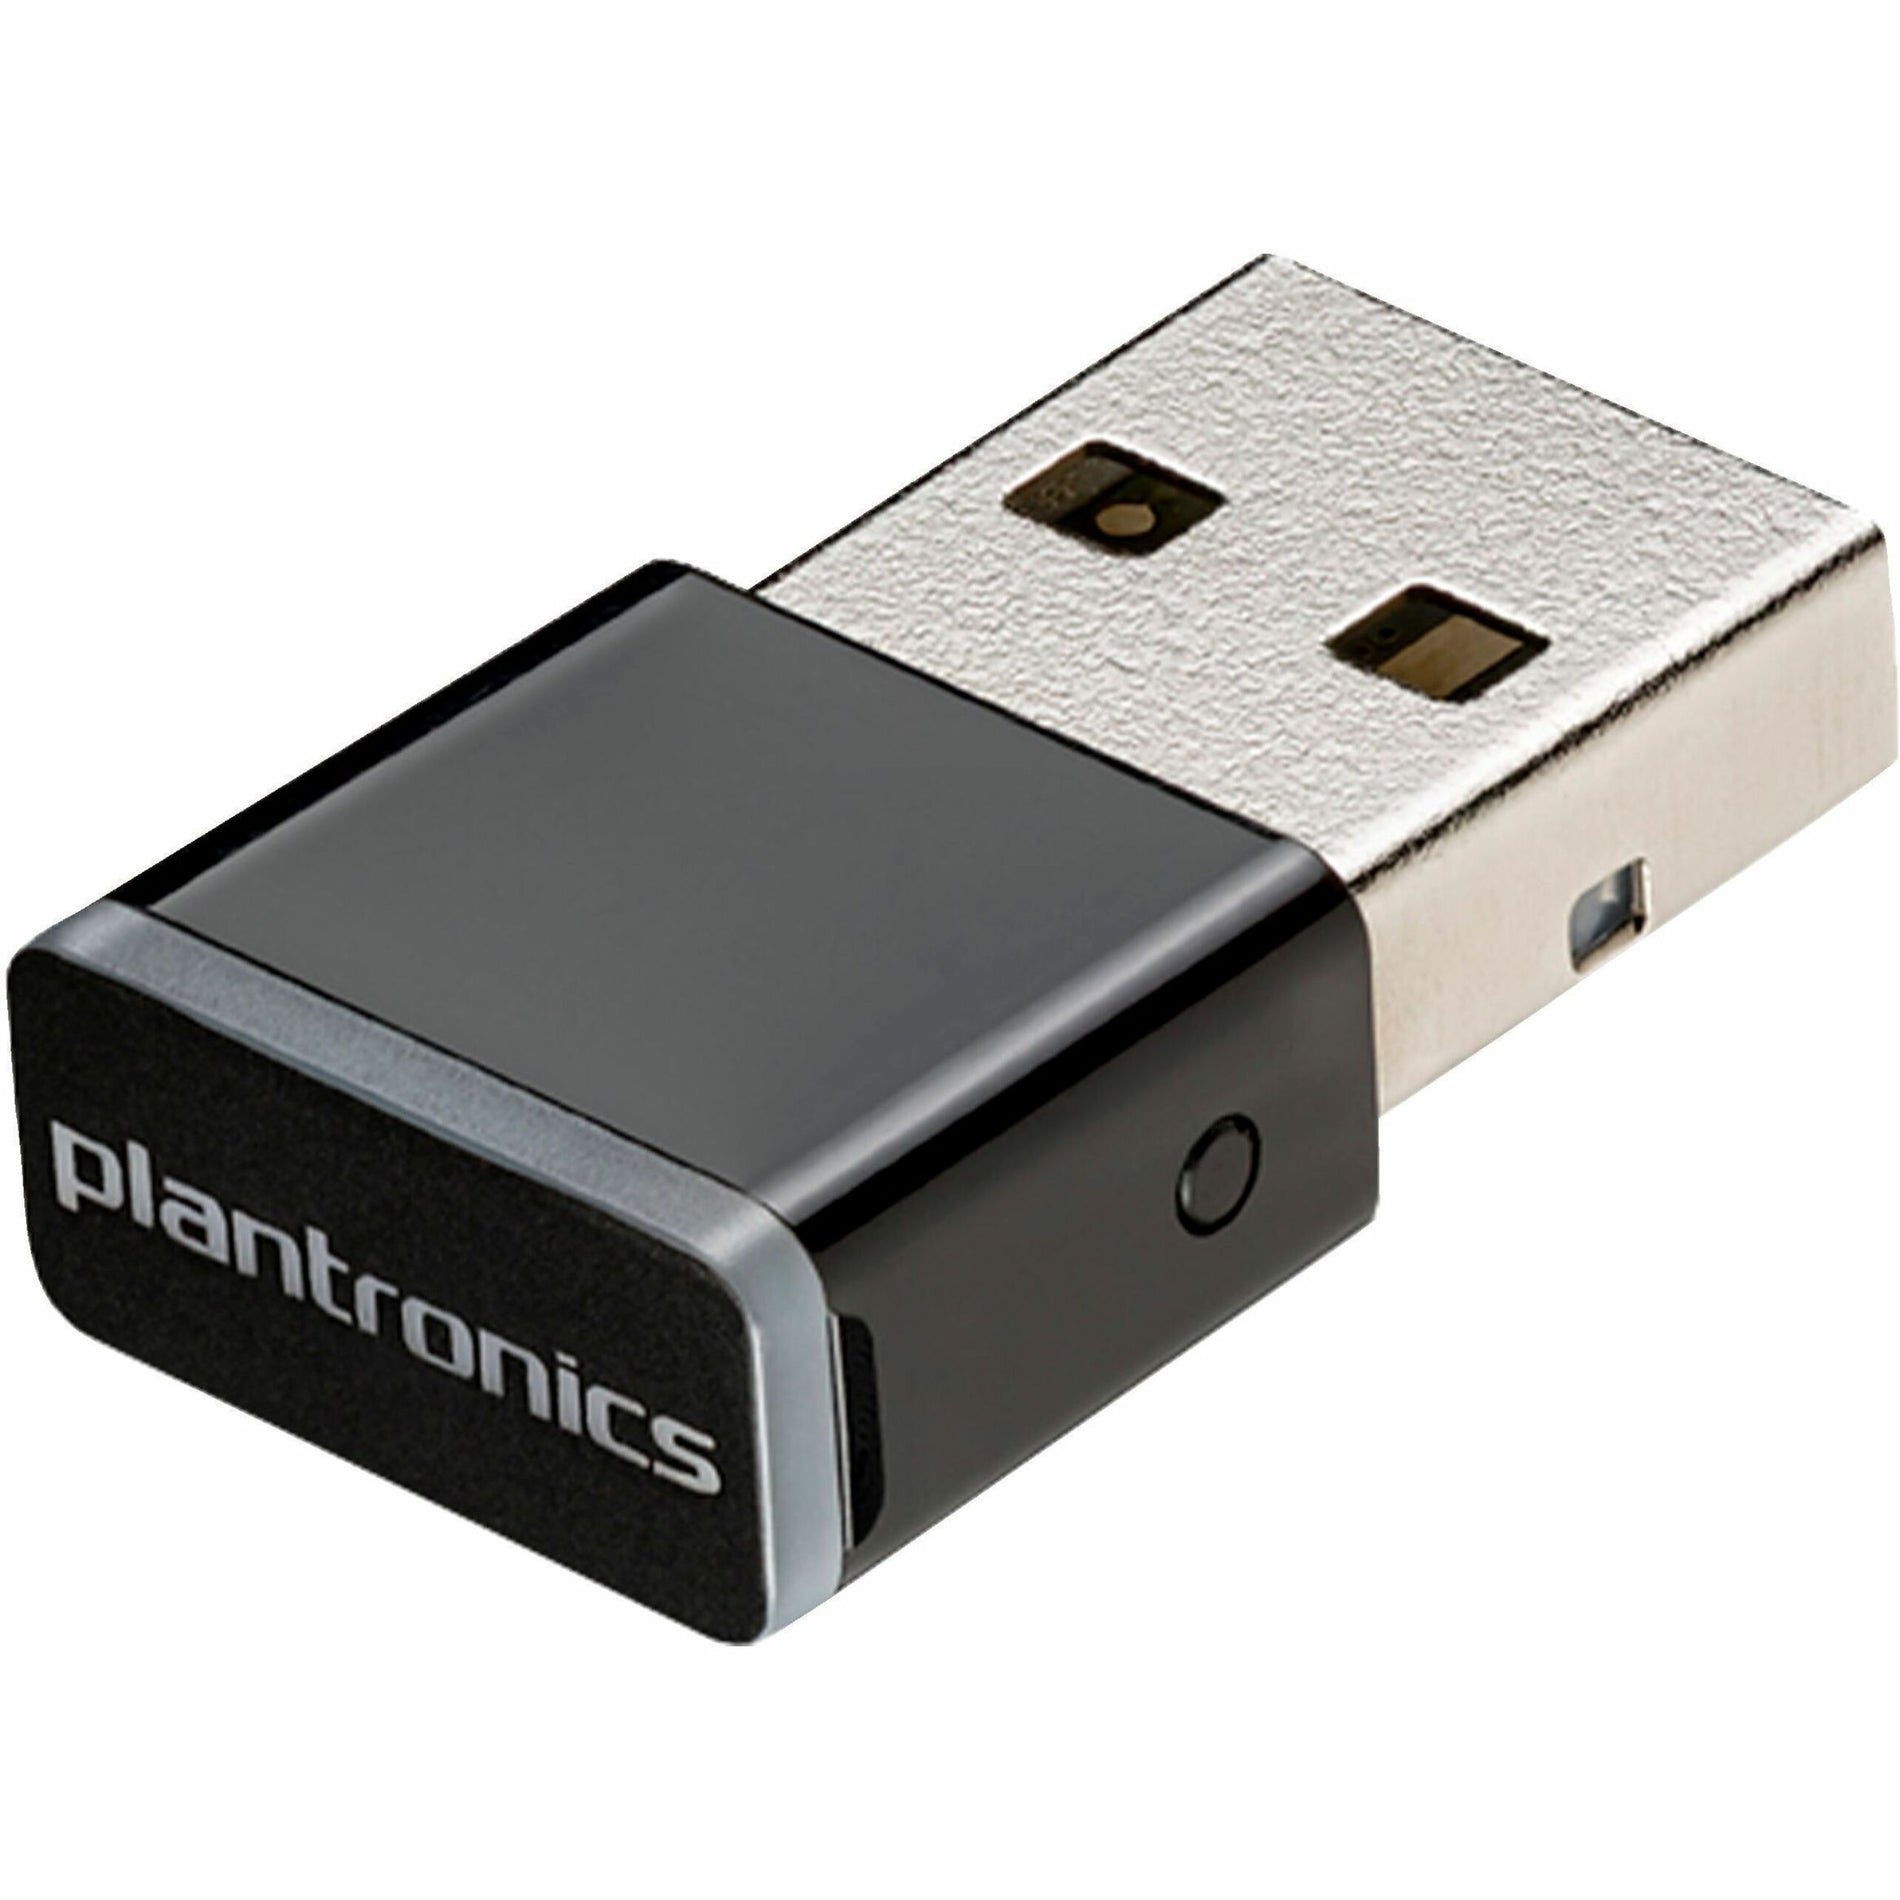 Poly 85Q79AA BT600 High-fidelity Bluetooth USB Adapter, Connect Your Desktop Computer or Bluetooth Headset